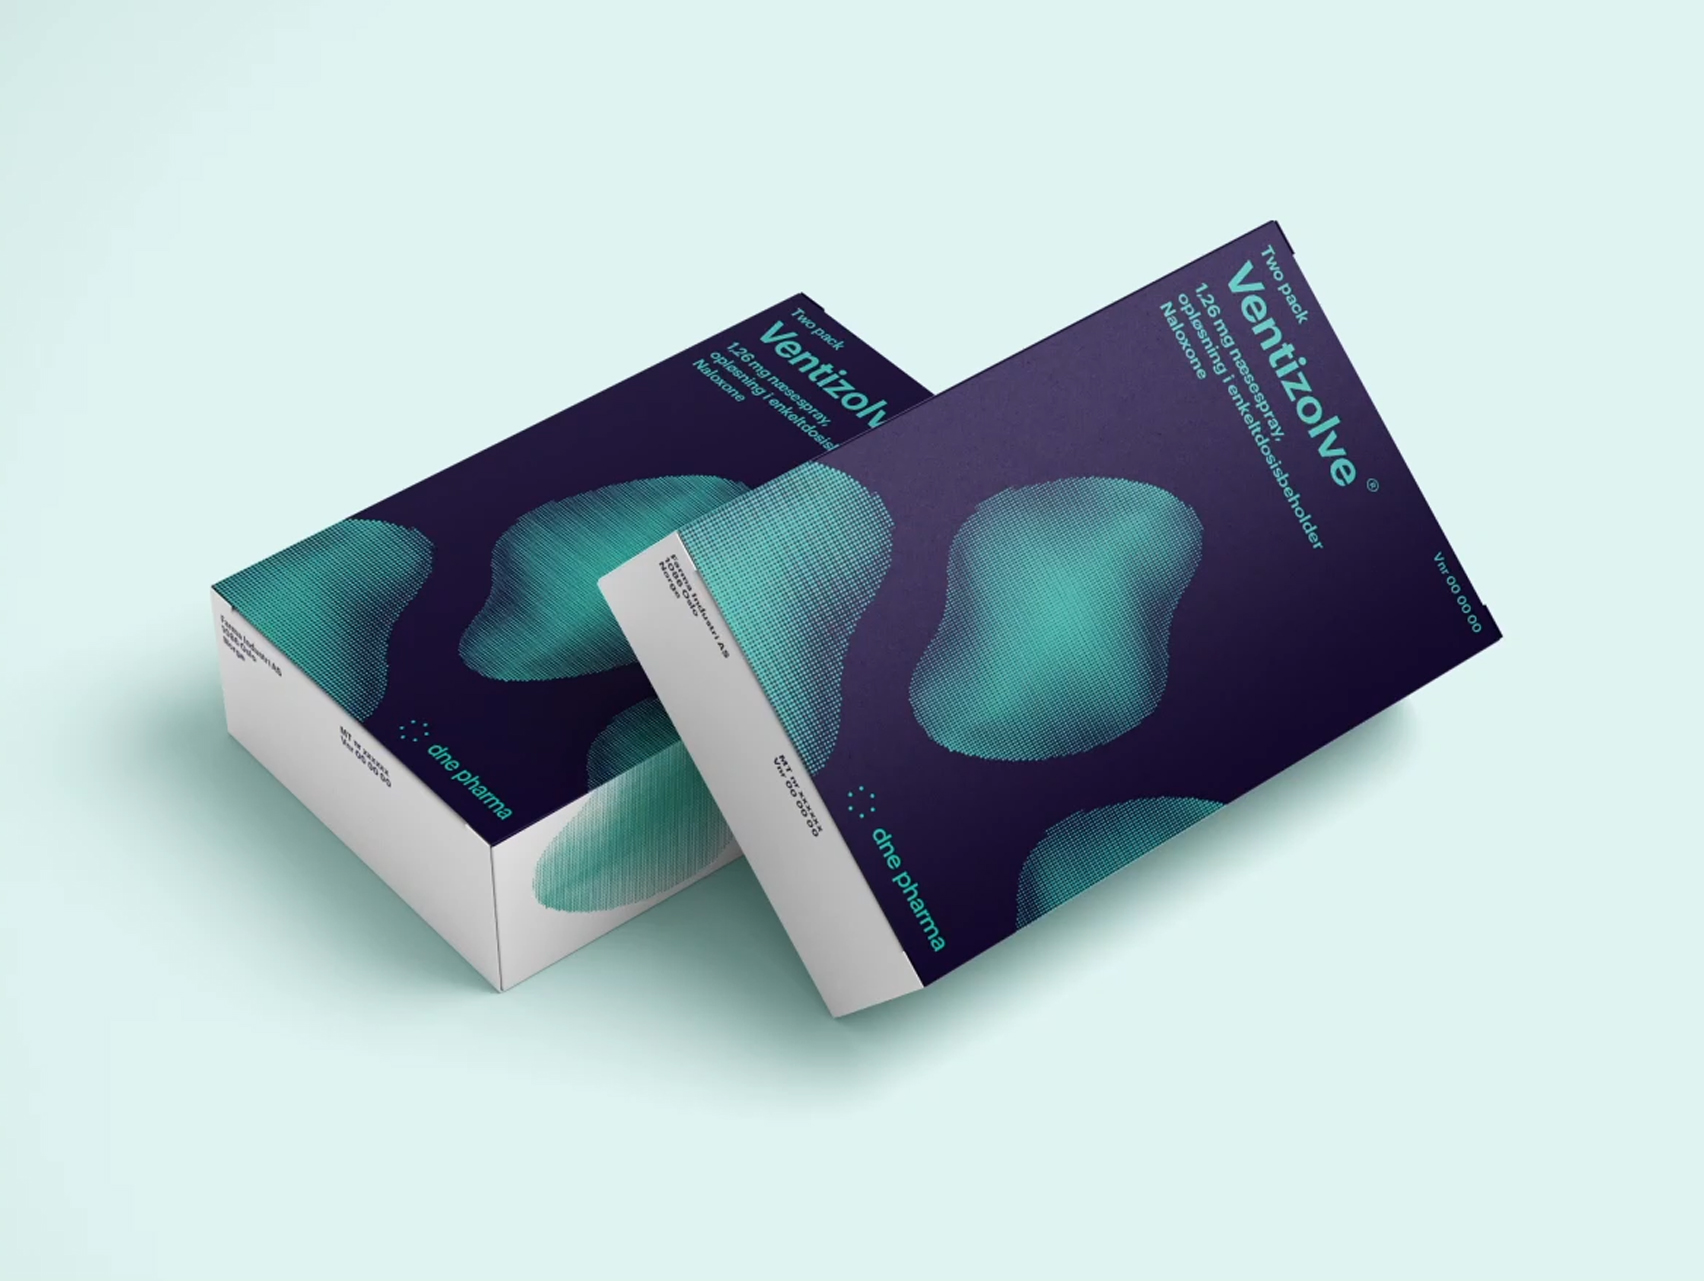 ANTI designed the Ventizolve kit to break away from the typical medical aesthetic